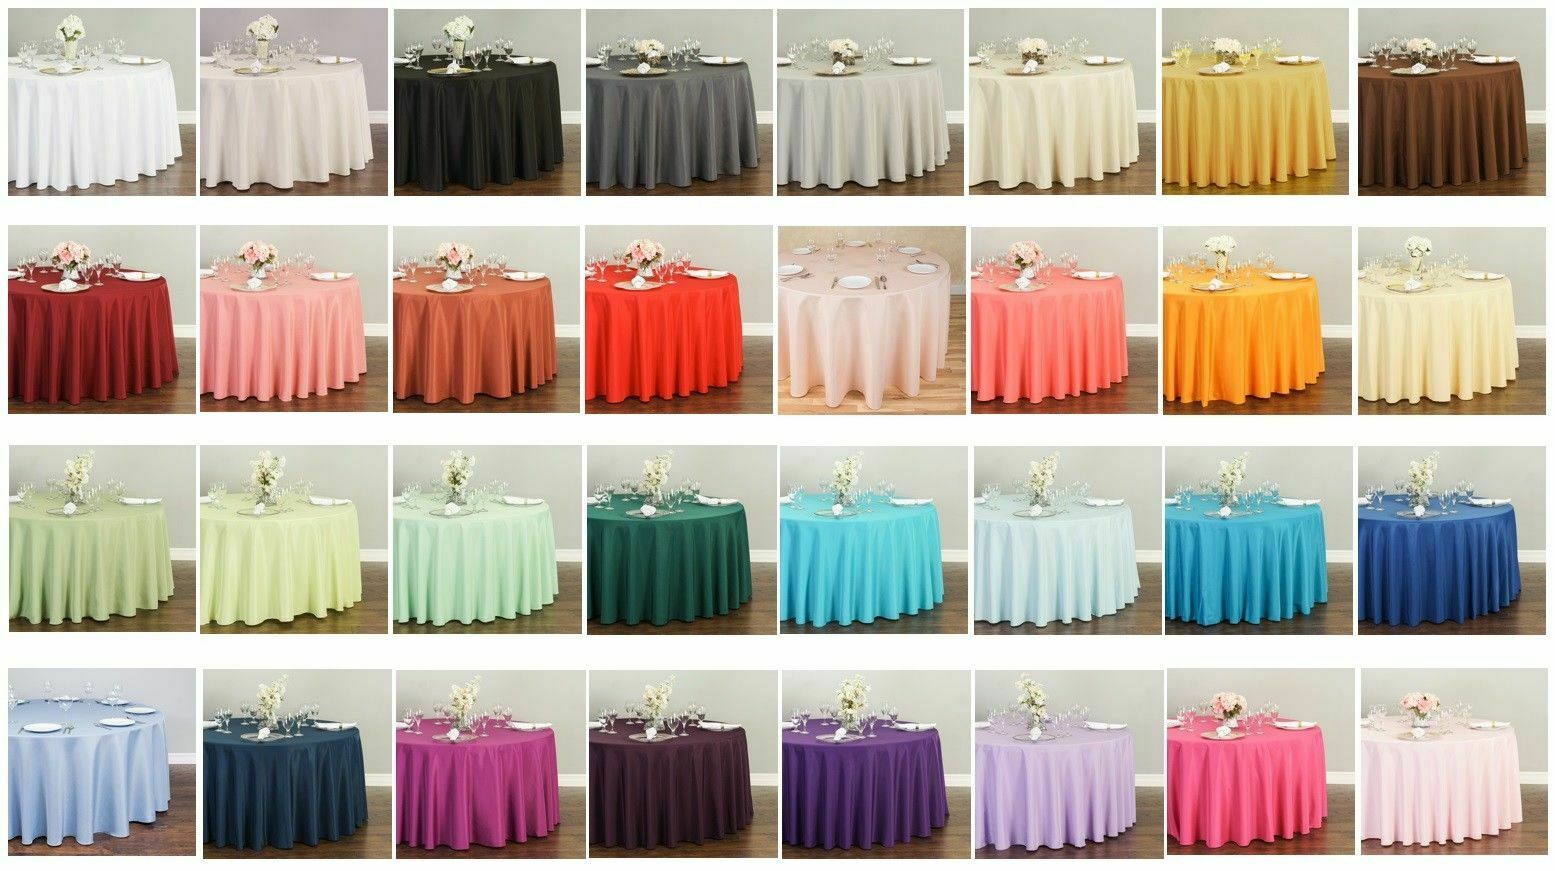 Linentablecloth 132 In. Round Polyester Tablecloths, 33 Colors! Wedding Event